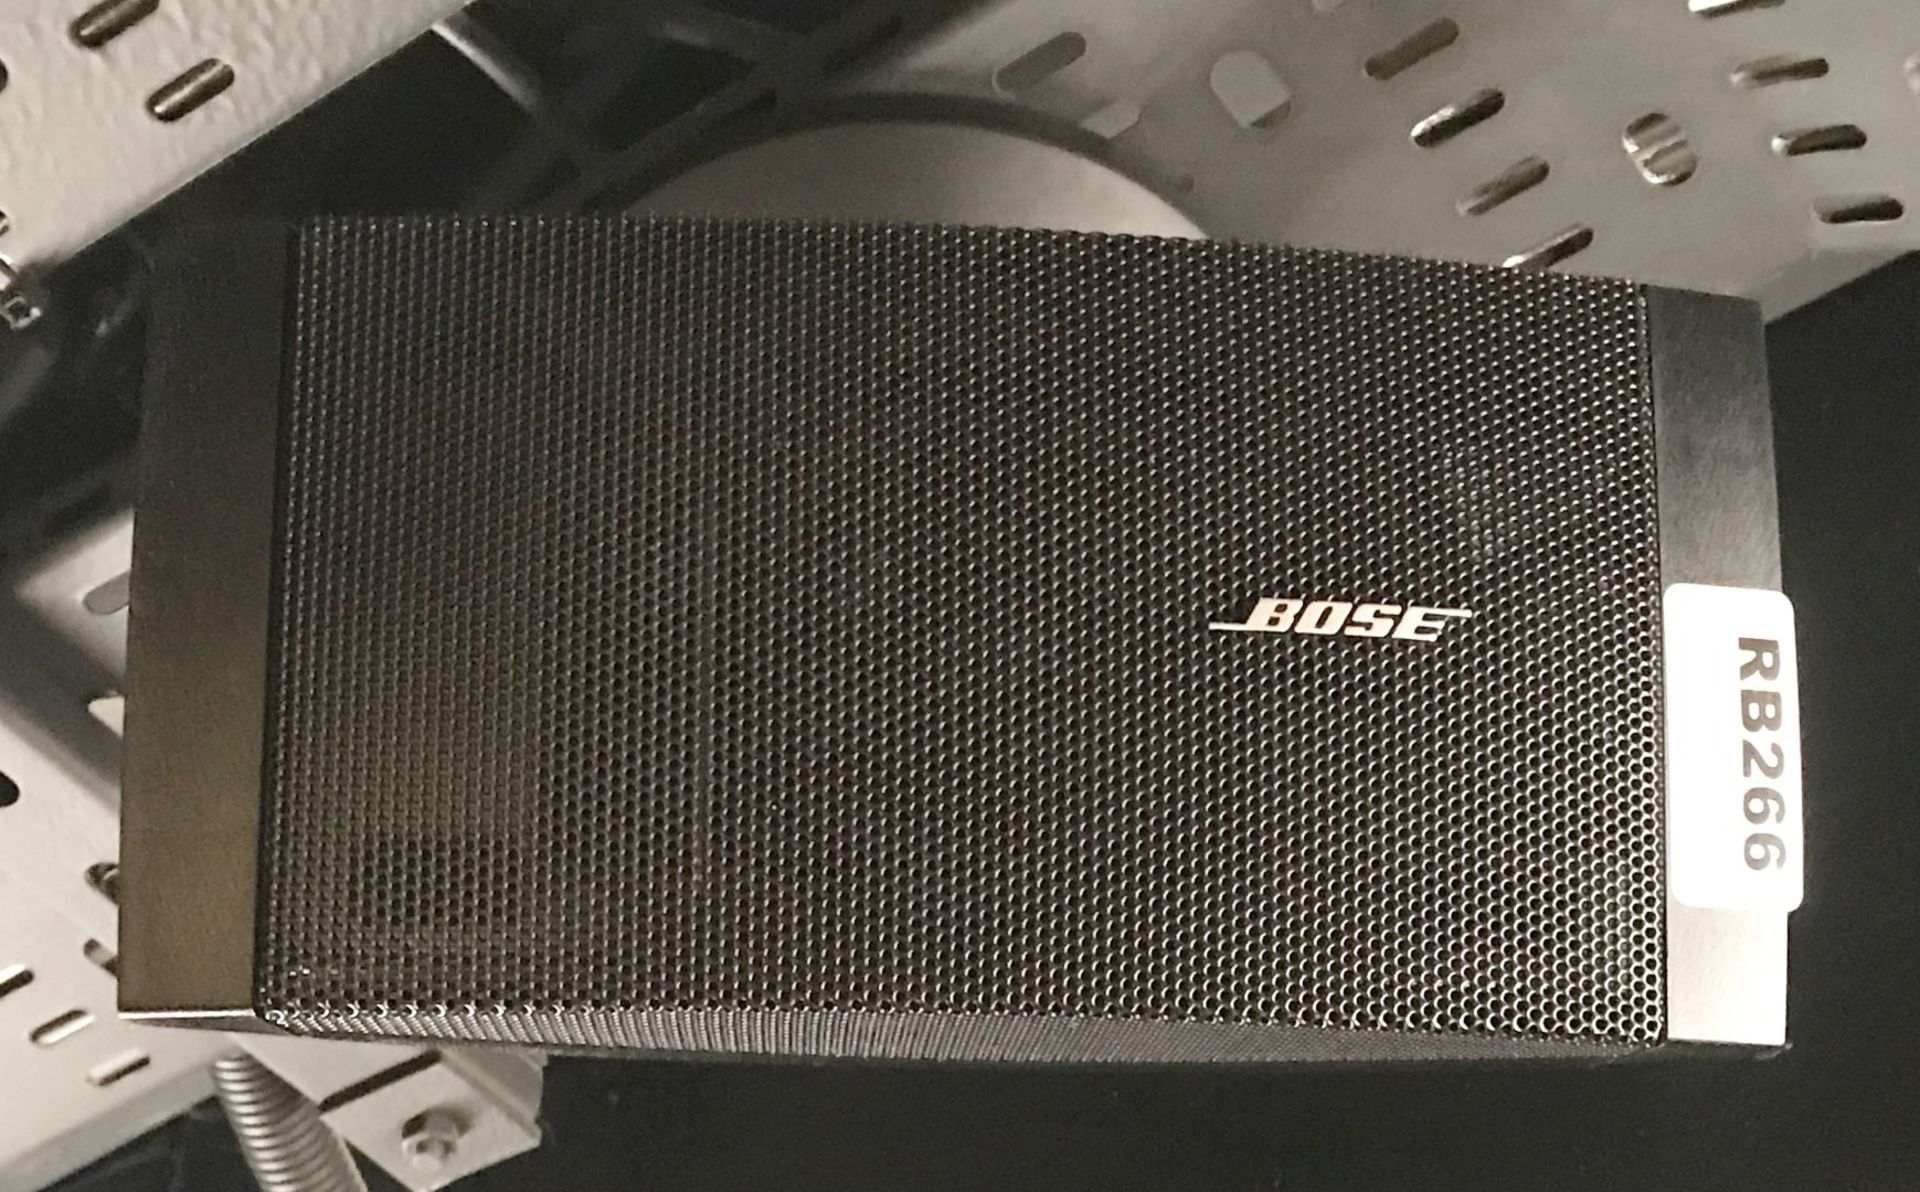 1 x Bose FreeSpace DS16S Indoor Surface-Mount Loudspeaker in Black - RRP £150 - CL584 - Location: - Image 2 of 5